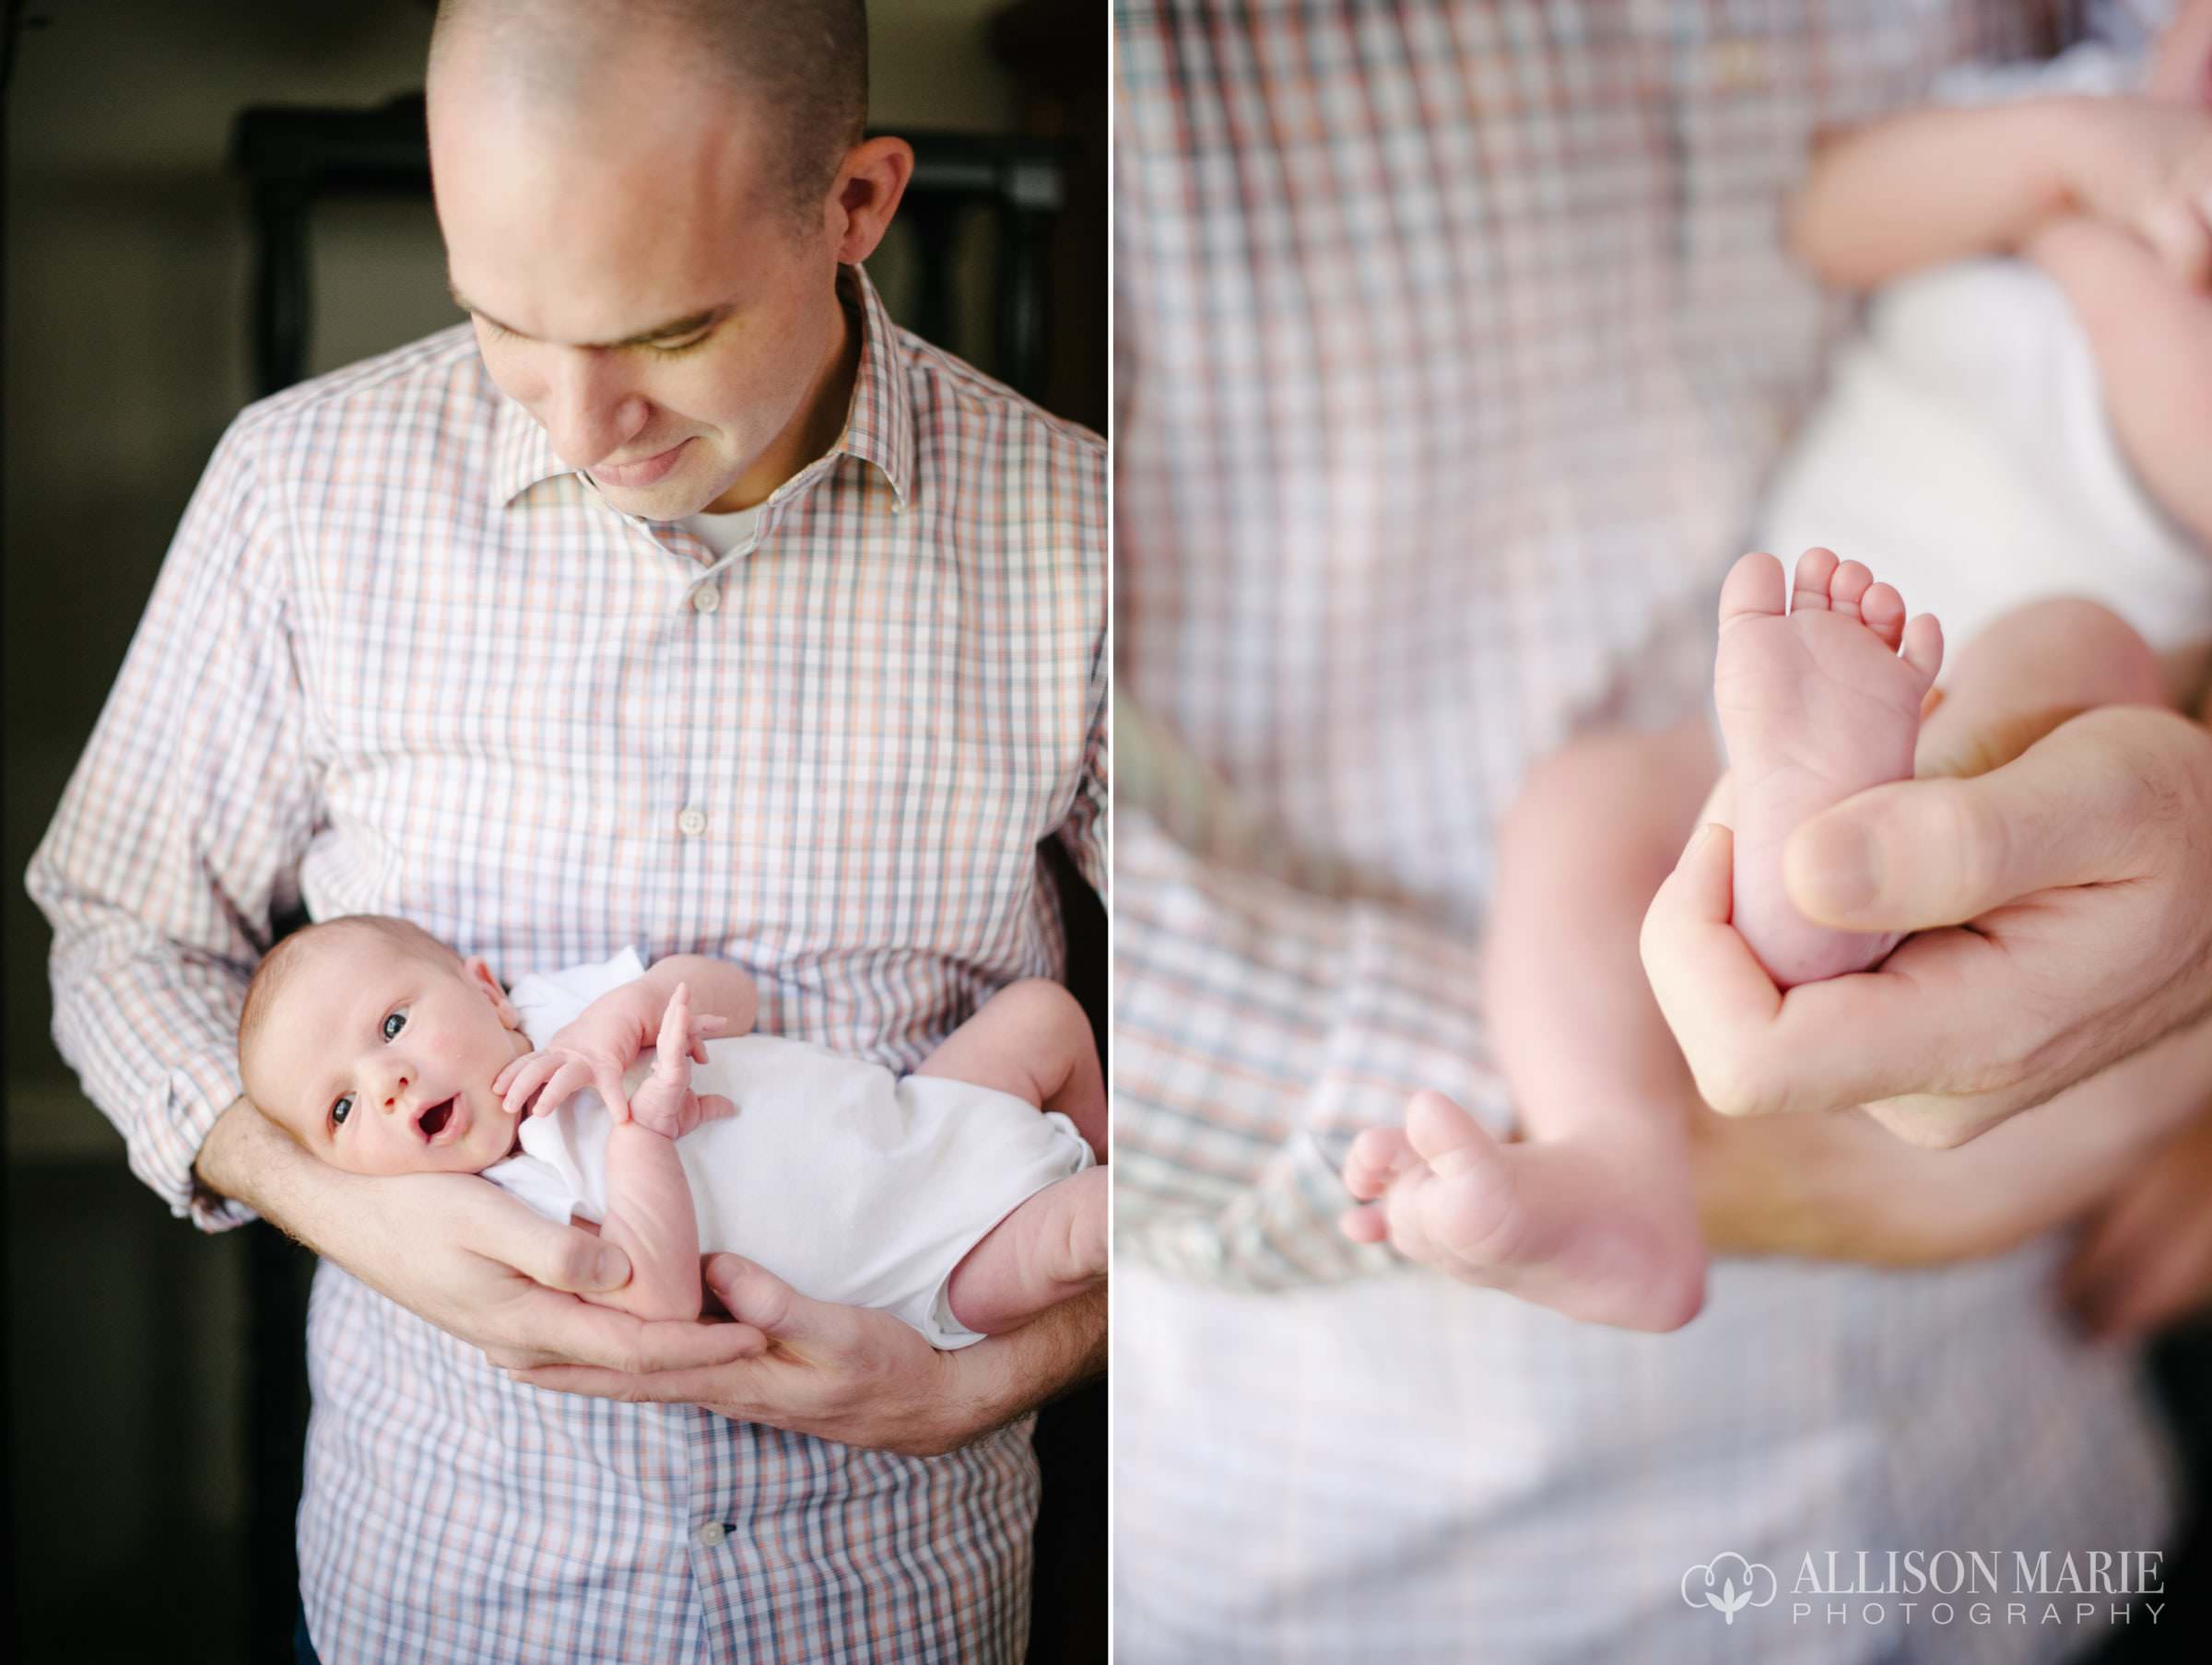 Favorite Family Images 2014, Allison Marie Photography03